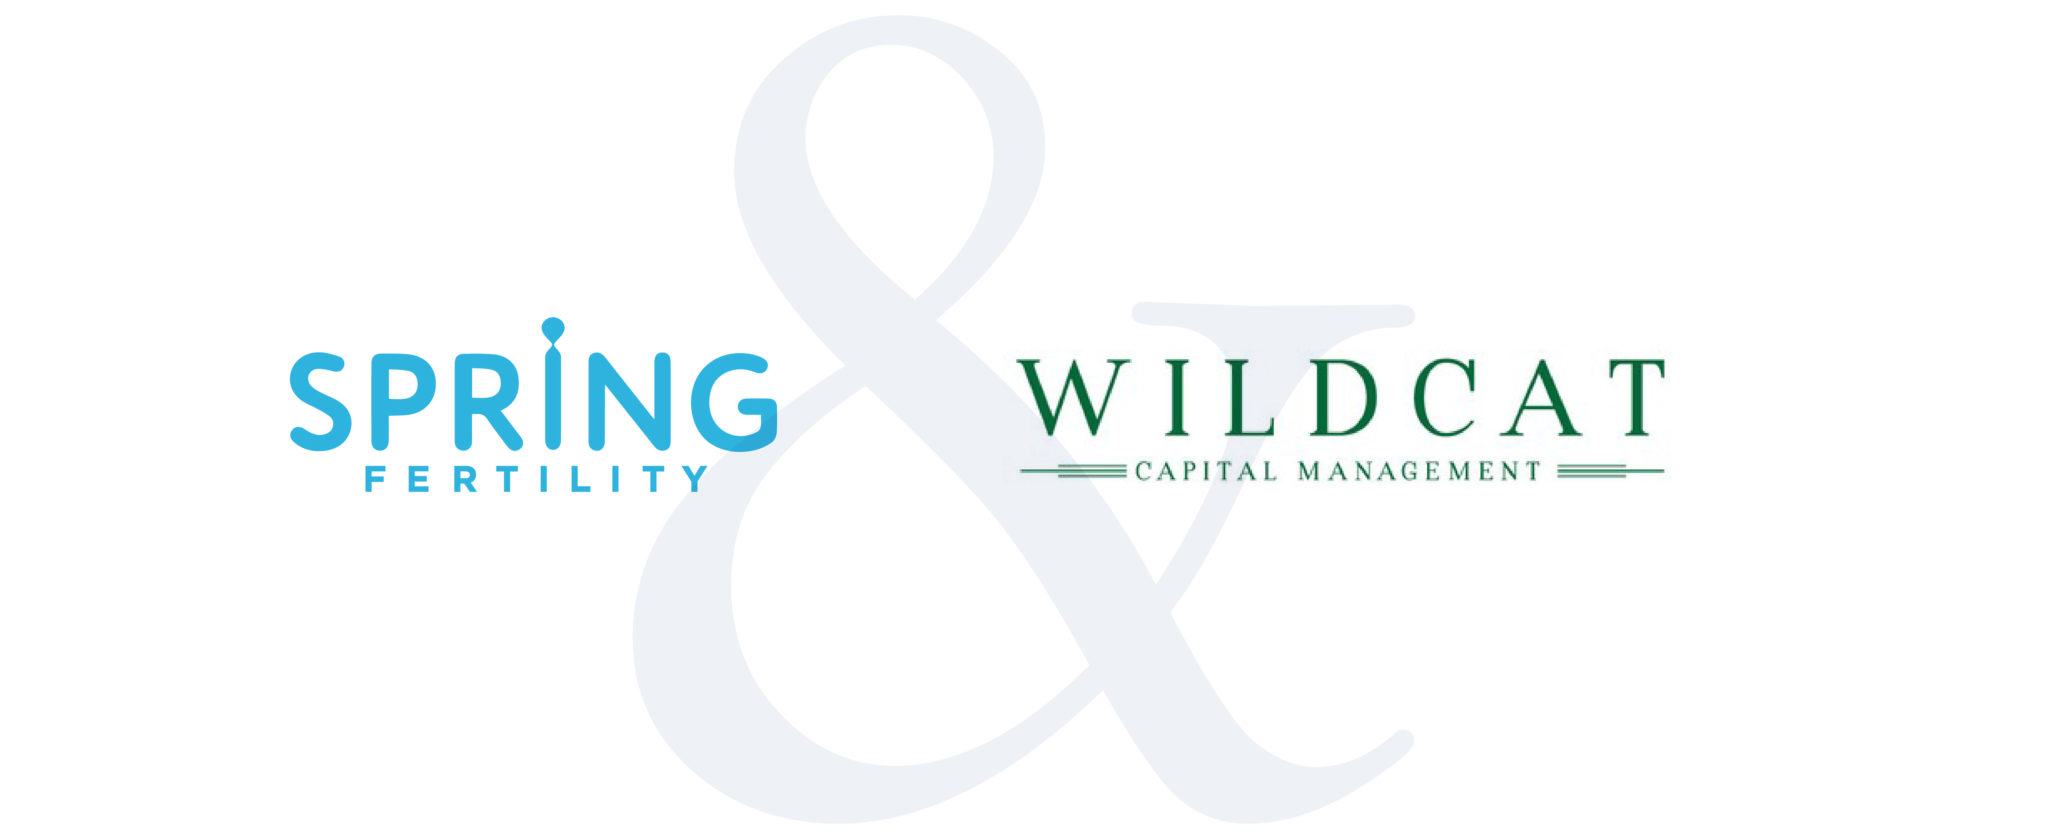 Spring Fertility Receives Significant Growth Investment from Wildcat Capital Management